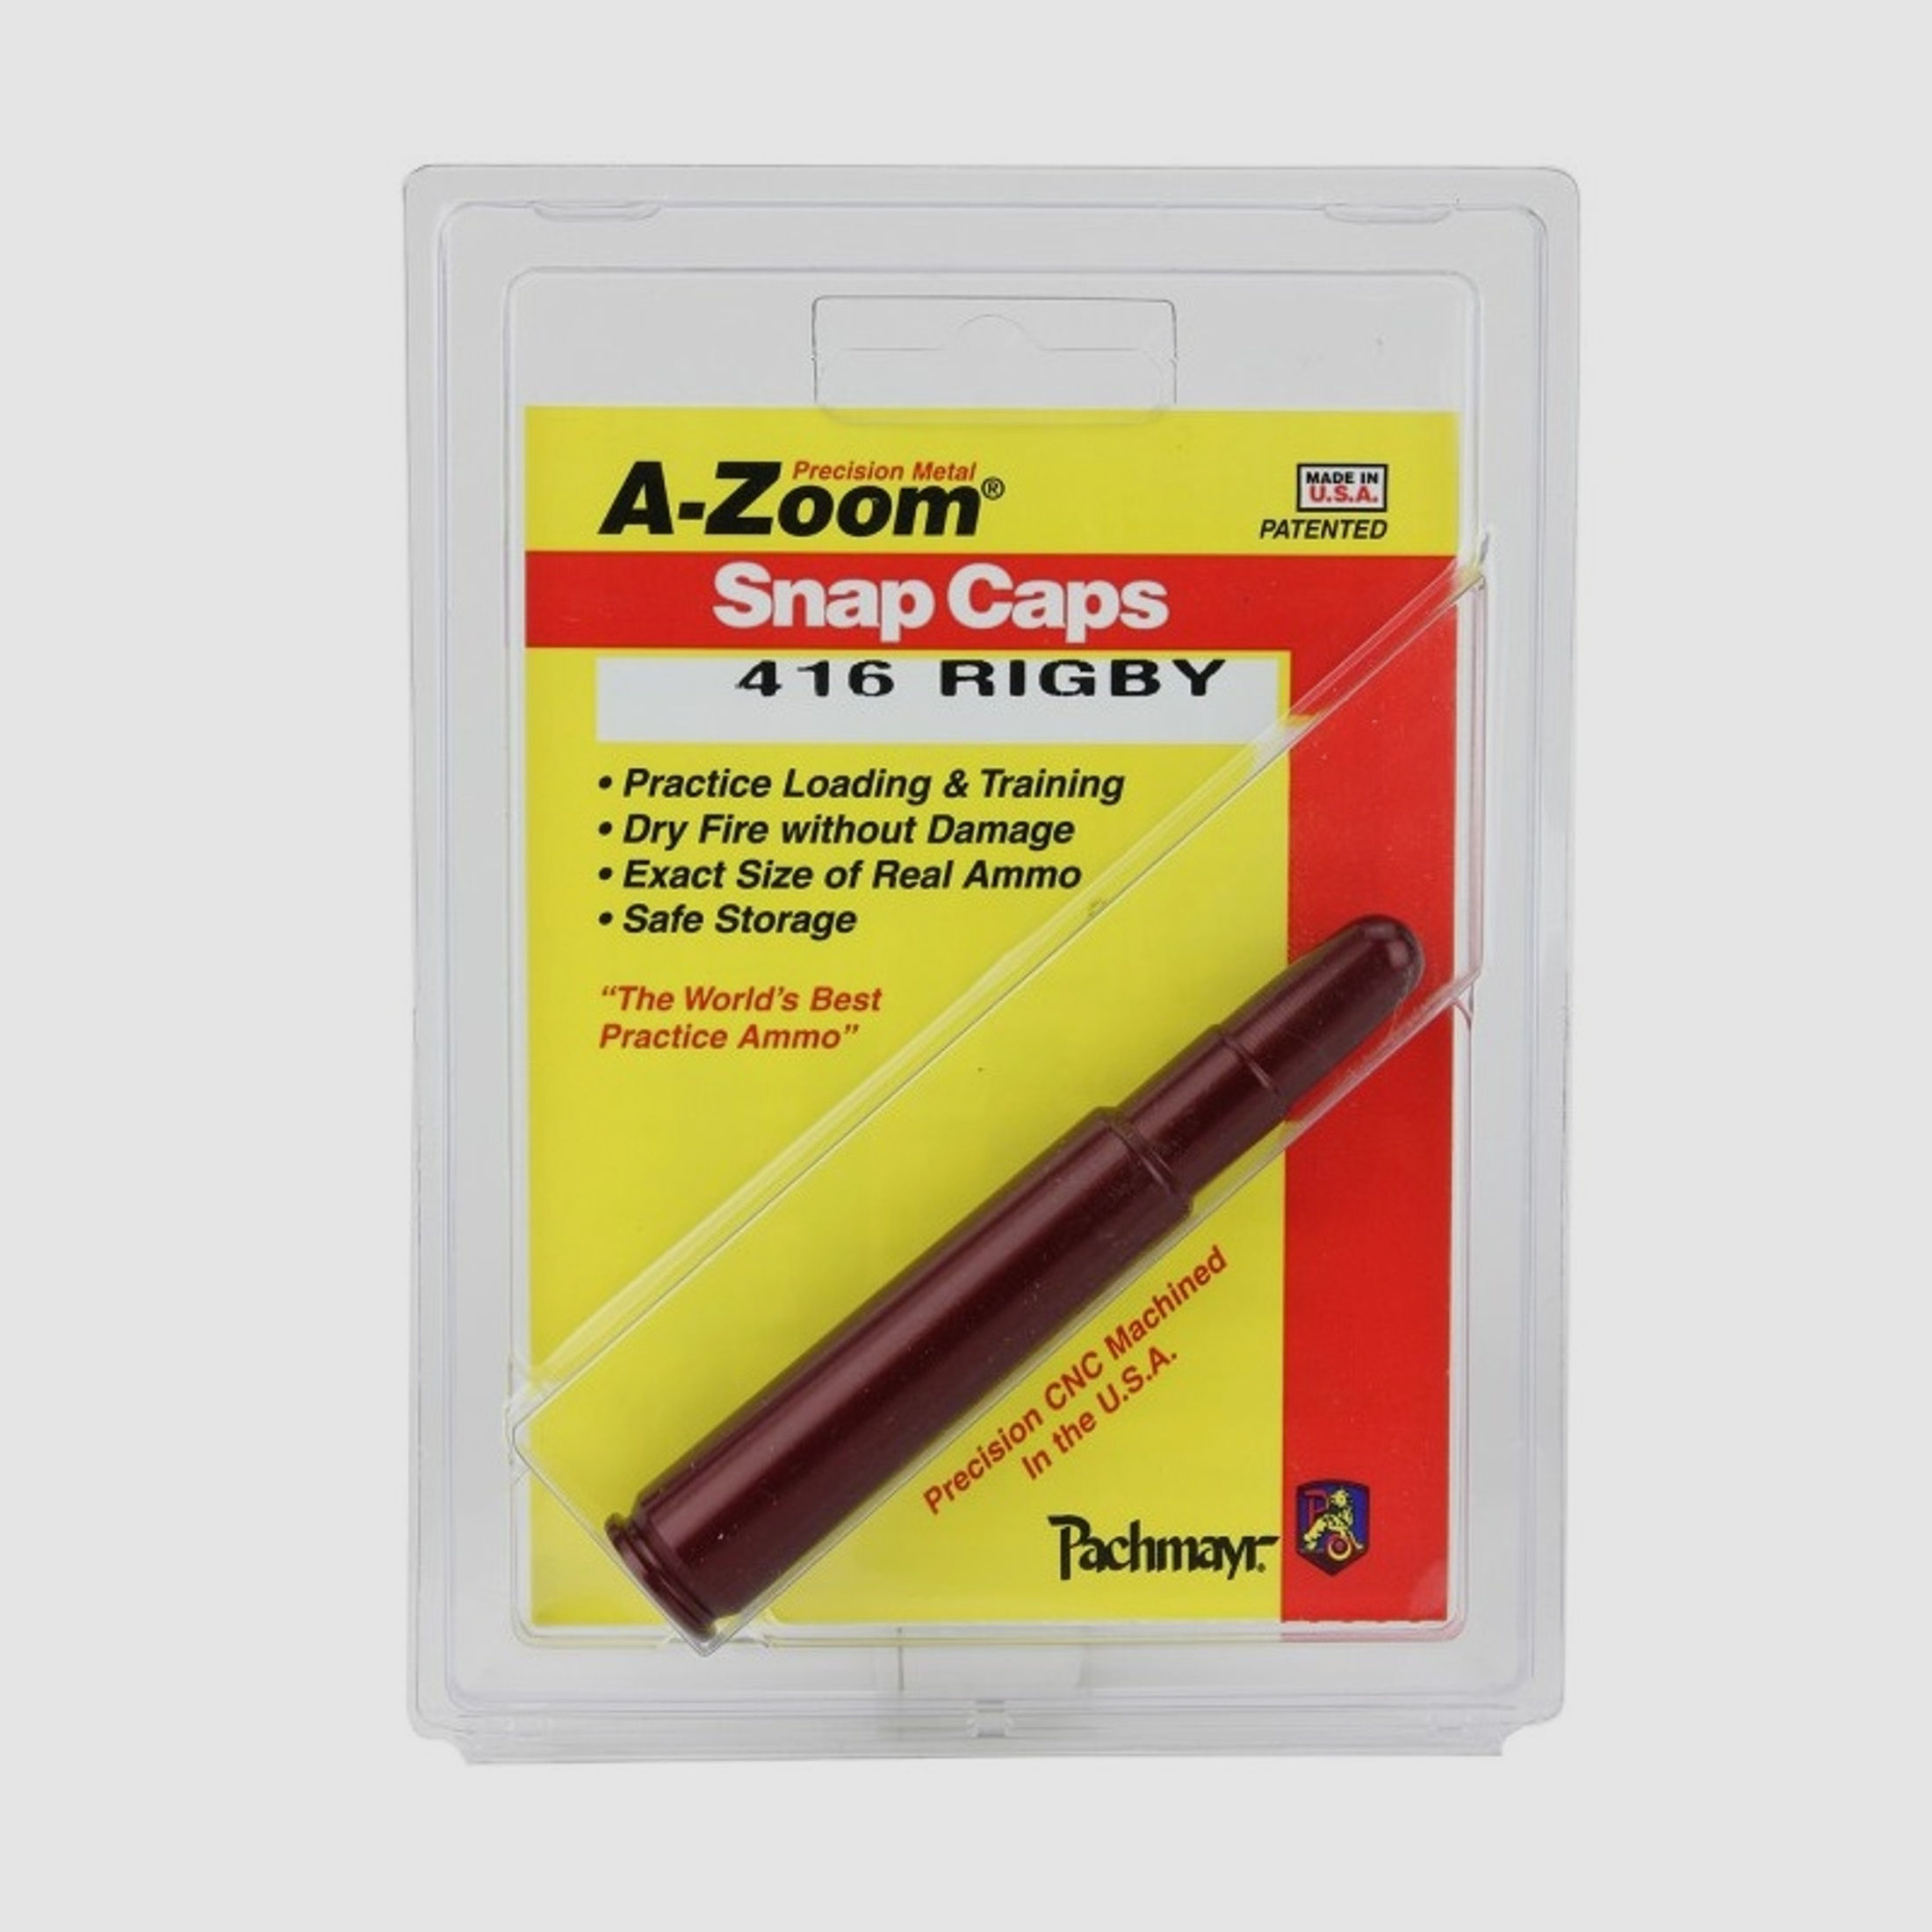 A-Zoom 1 Pufferpatrone 416Rigby